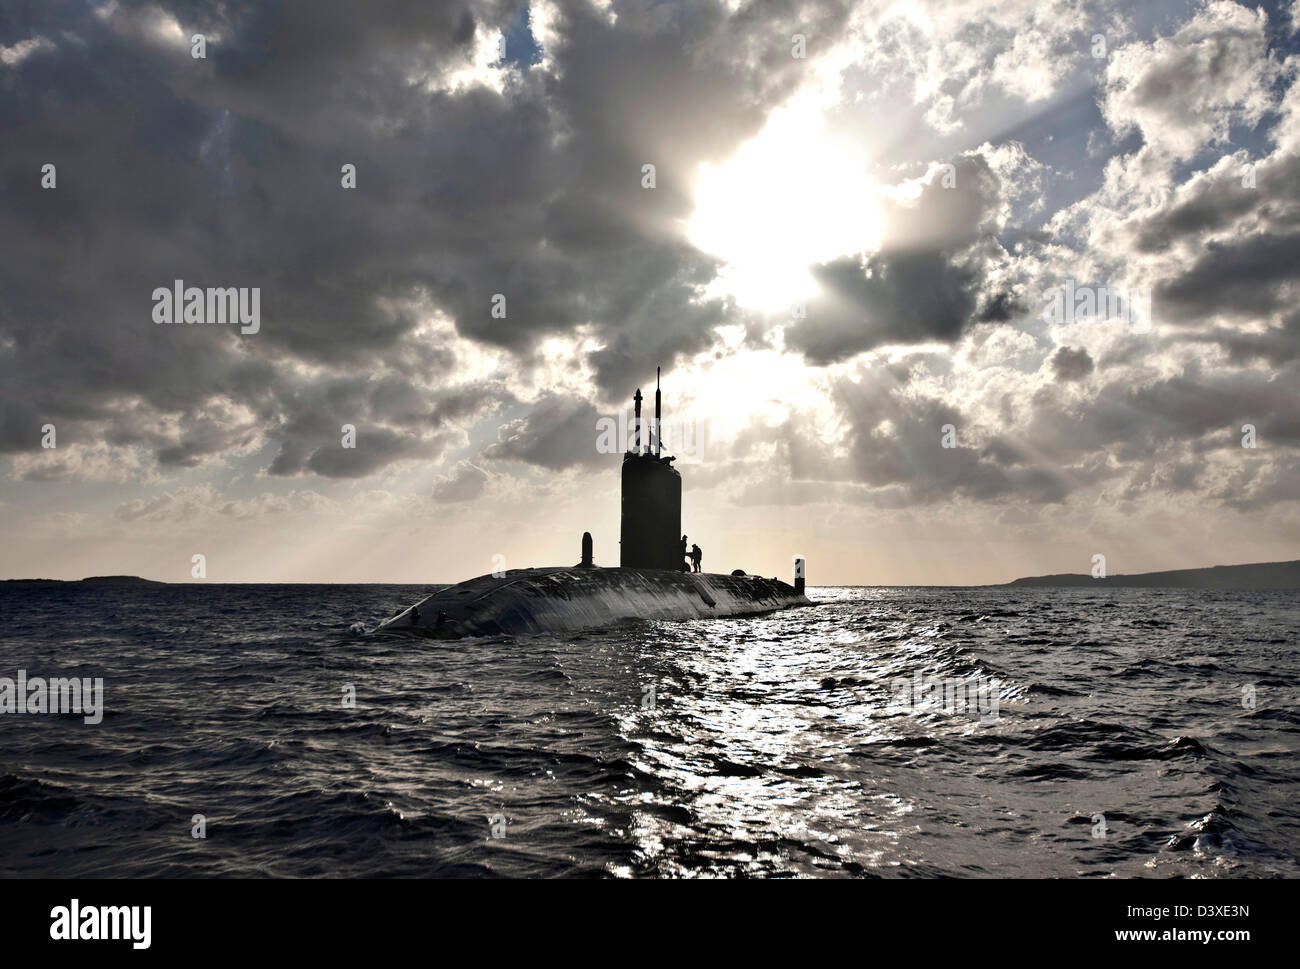 Nuclear Submarine HMS Talent with sunlight on water, Egypt Stock Photo